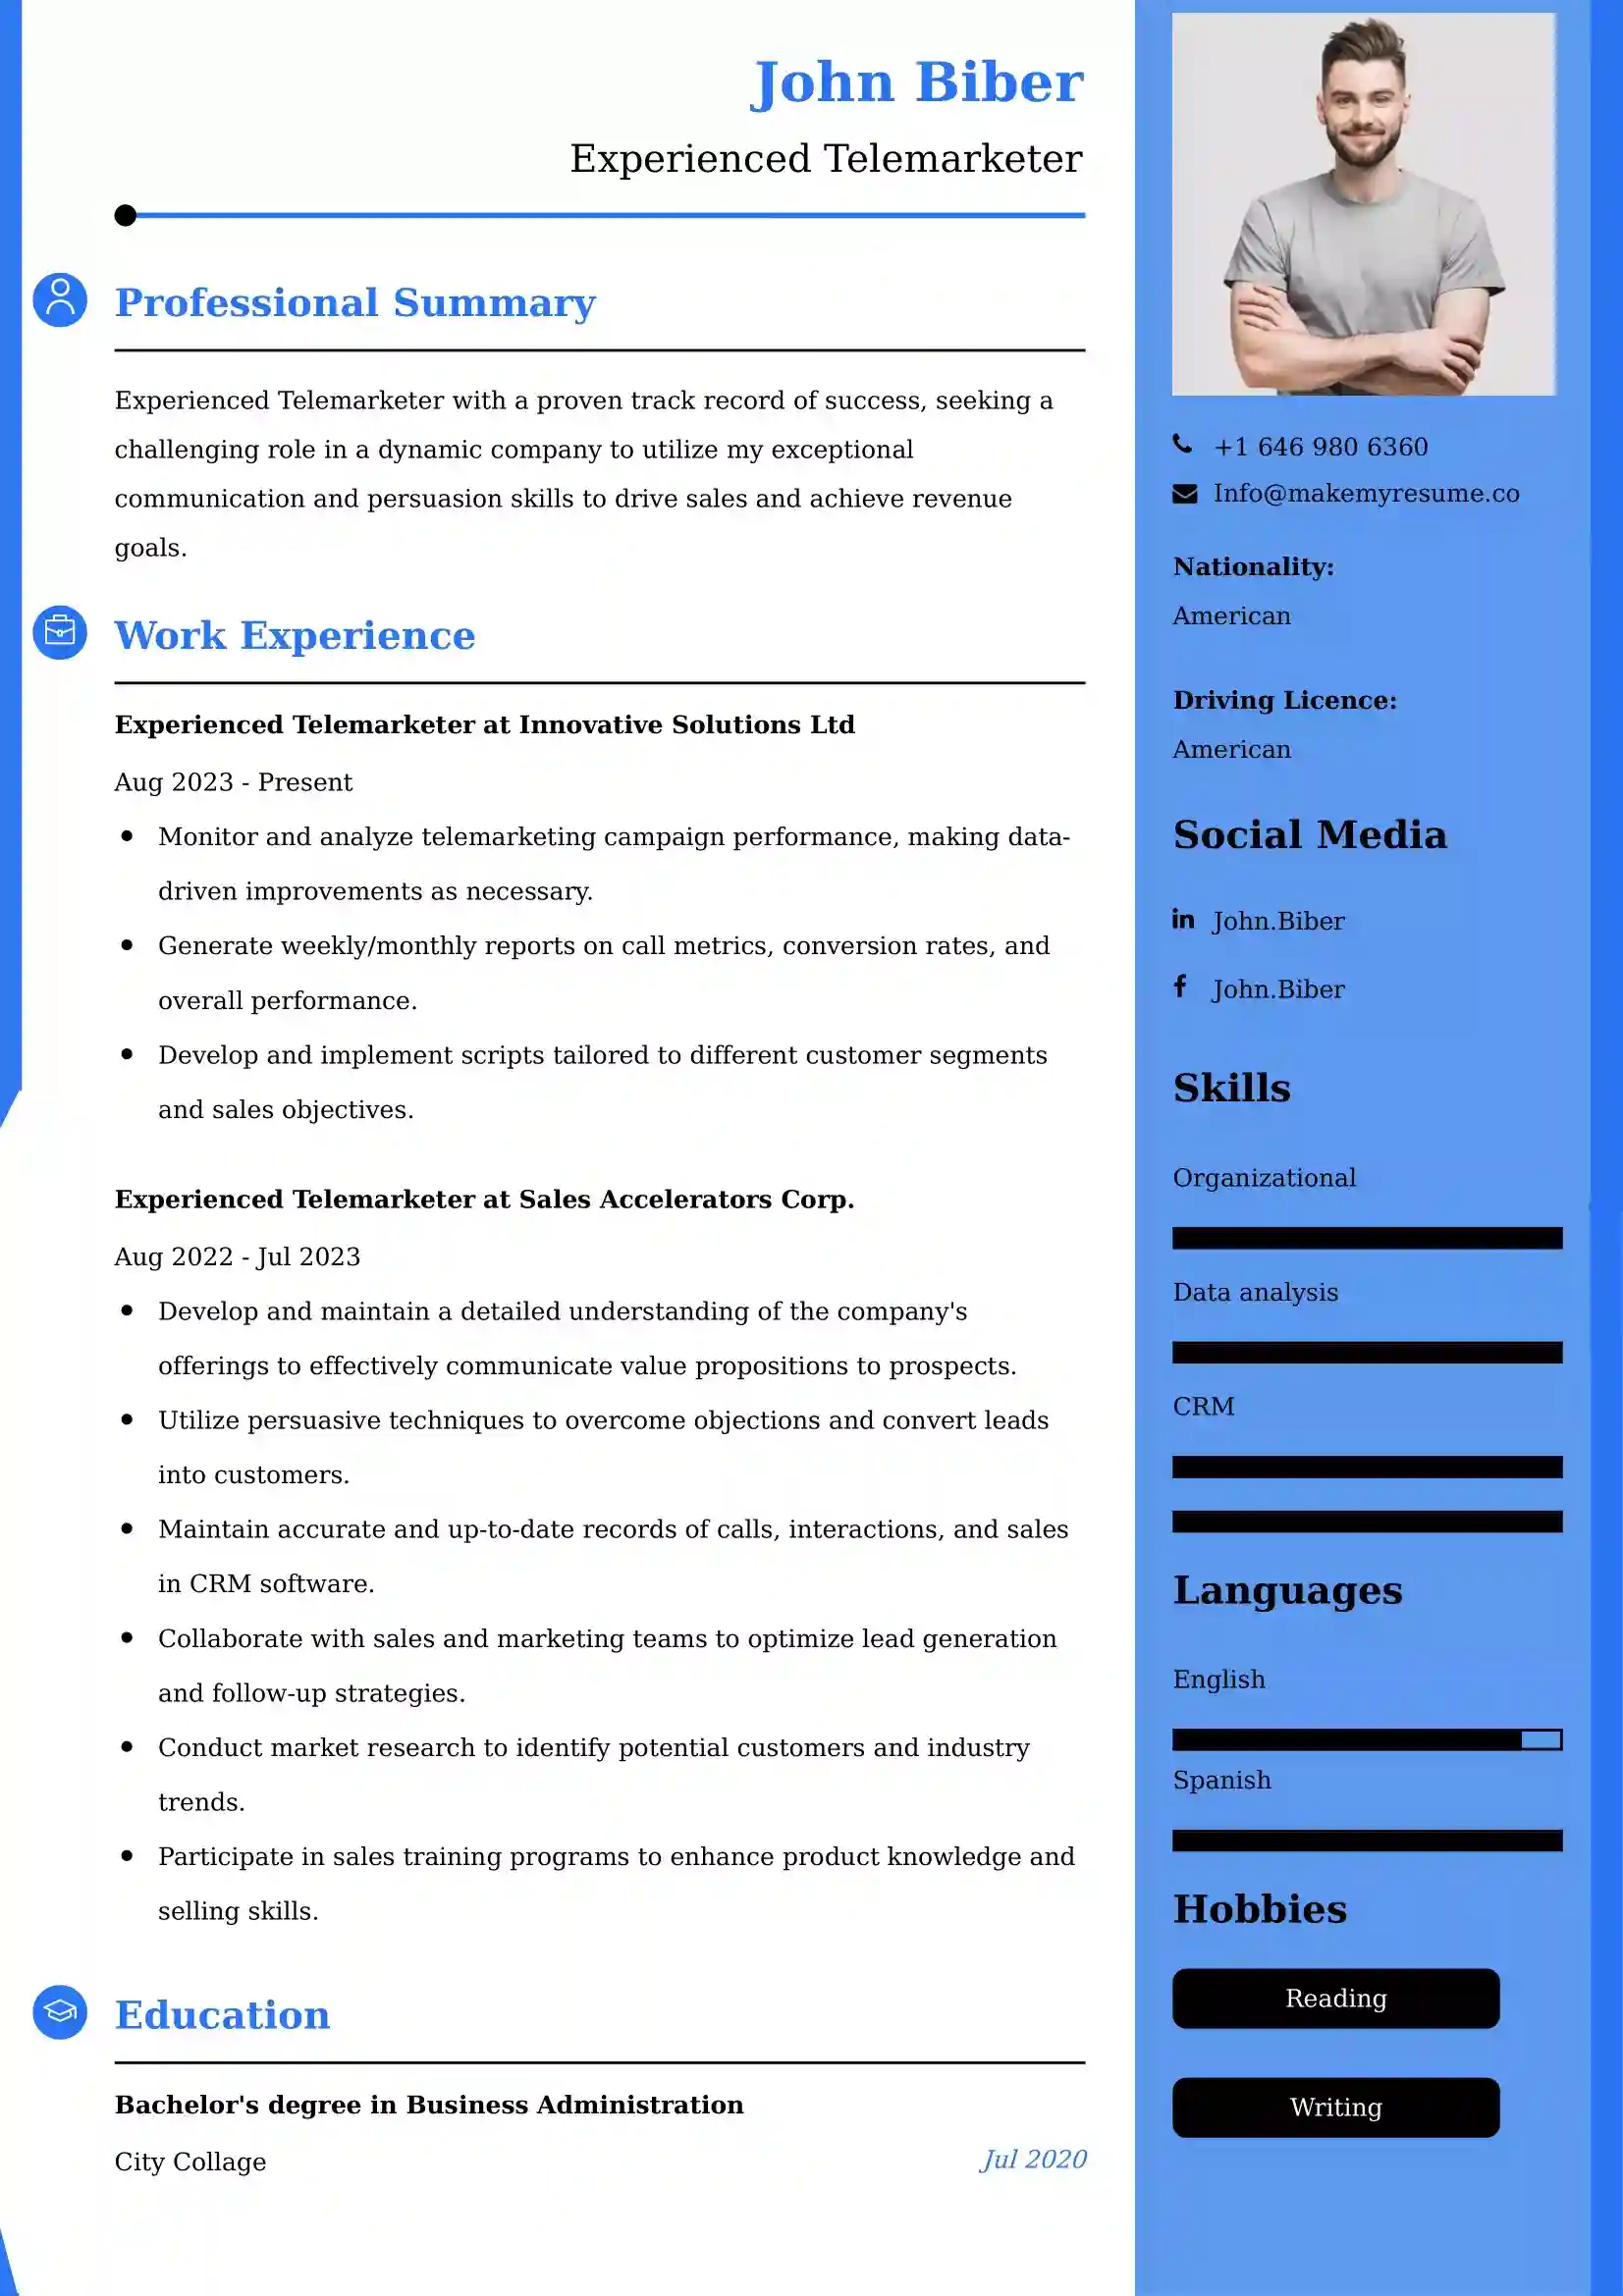 Experienced Telemarketer Resume Examples - Australian Format and Tips